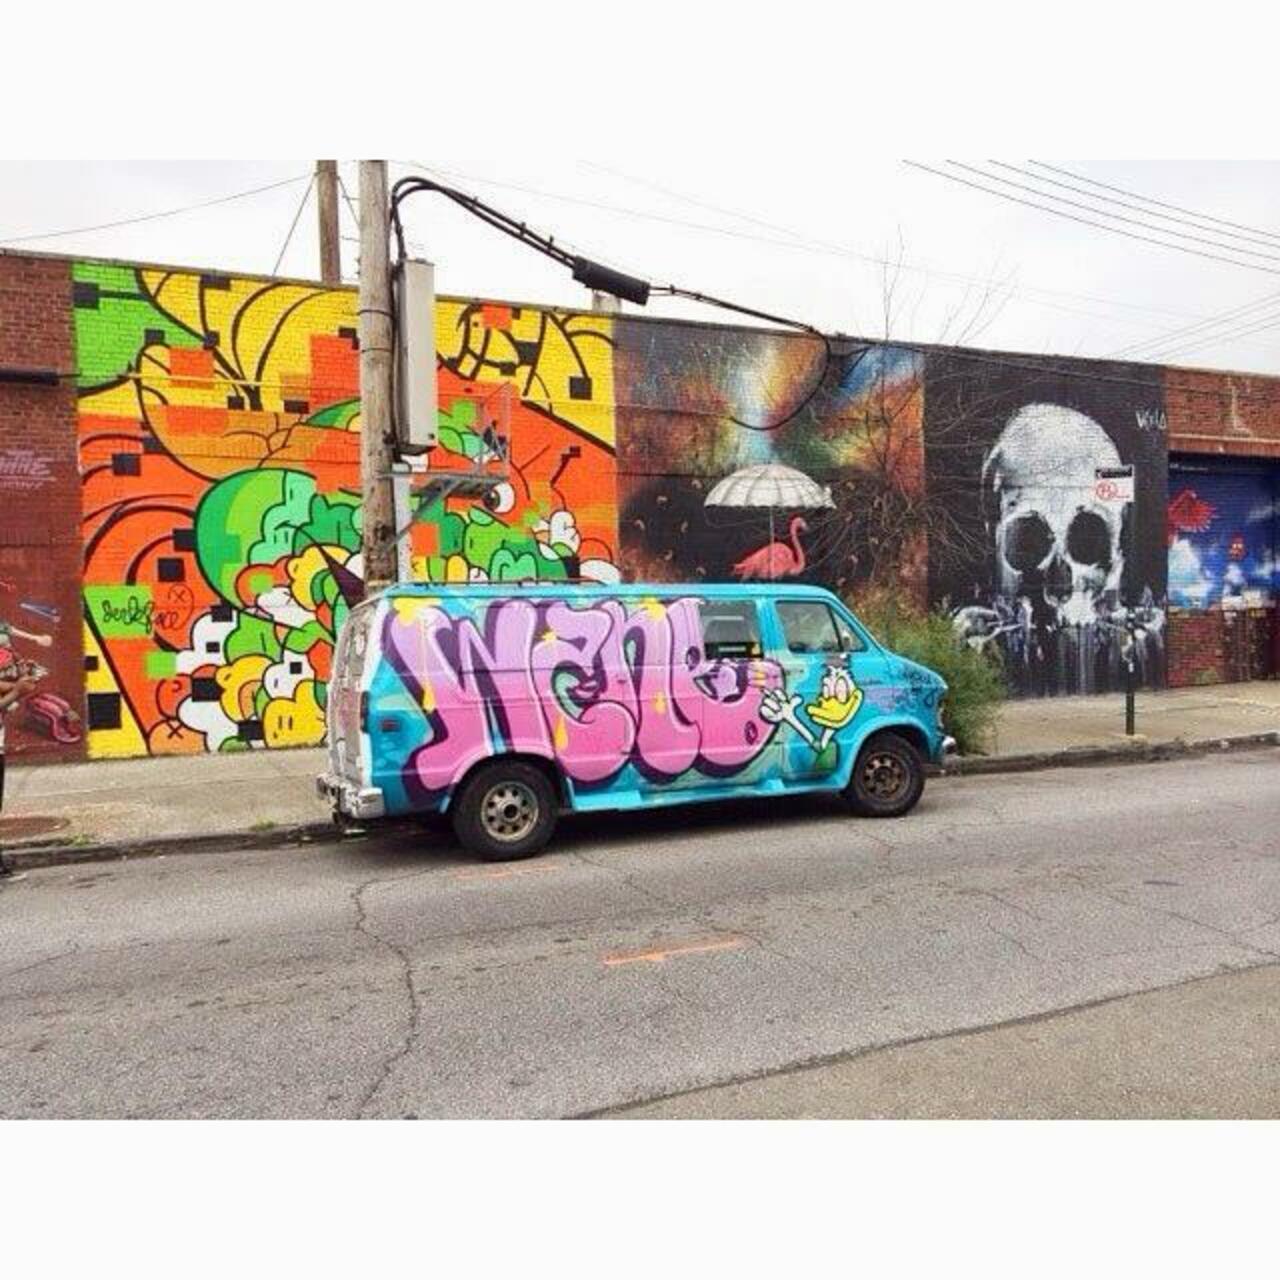 I saw this van in #brooklyn . Does anyone know of the #artist ? #streetart #graffiti http://t.co/on0nU3LqwX